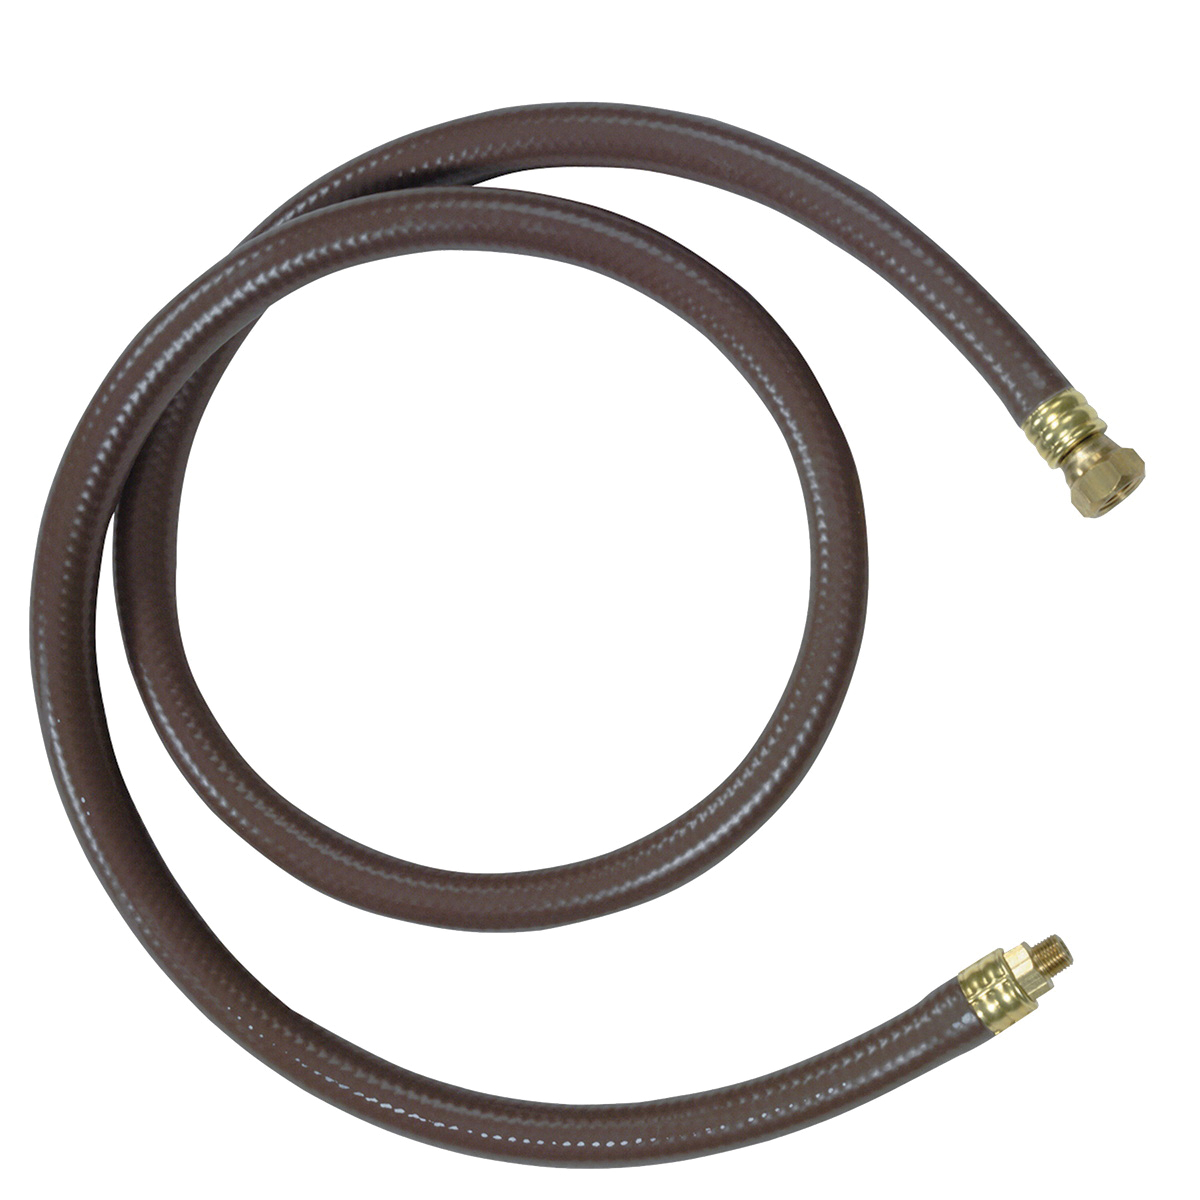 CHAPIN 6-6091 Hose Assembly, Industrial, Nylon, For: 1949 and 19149 Compression Sprayer